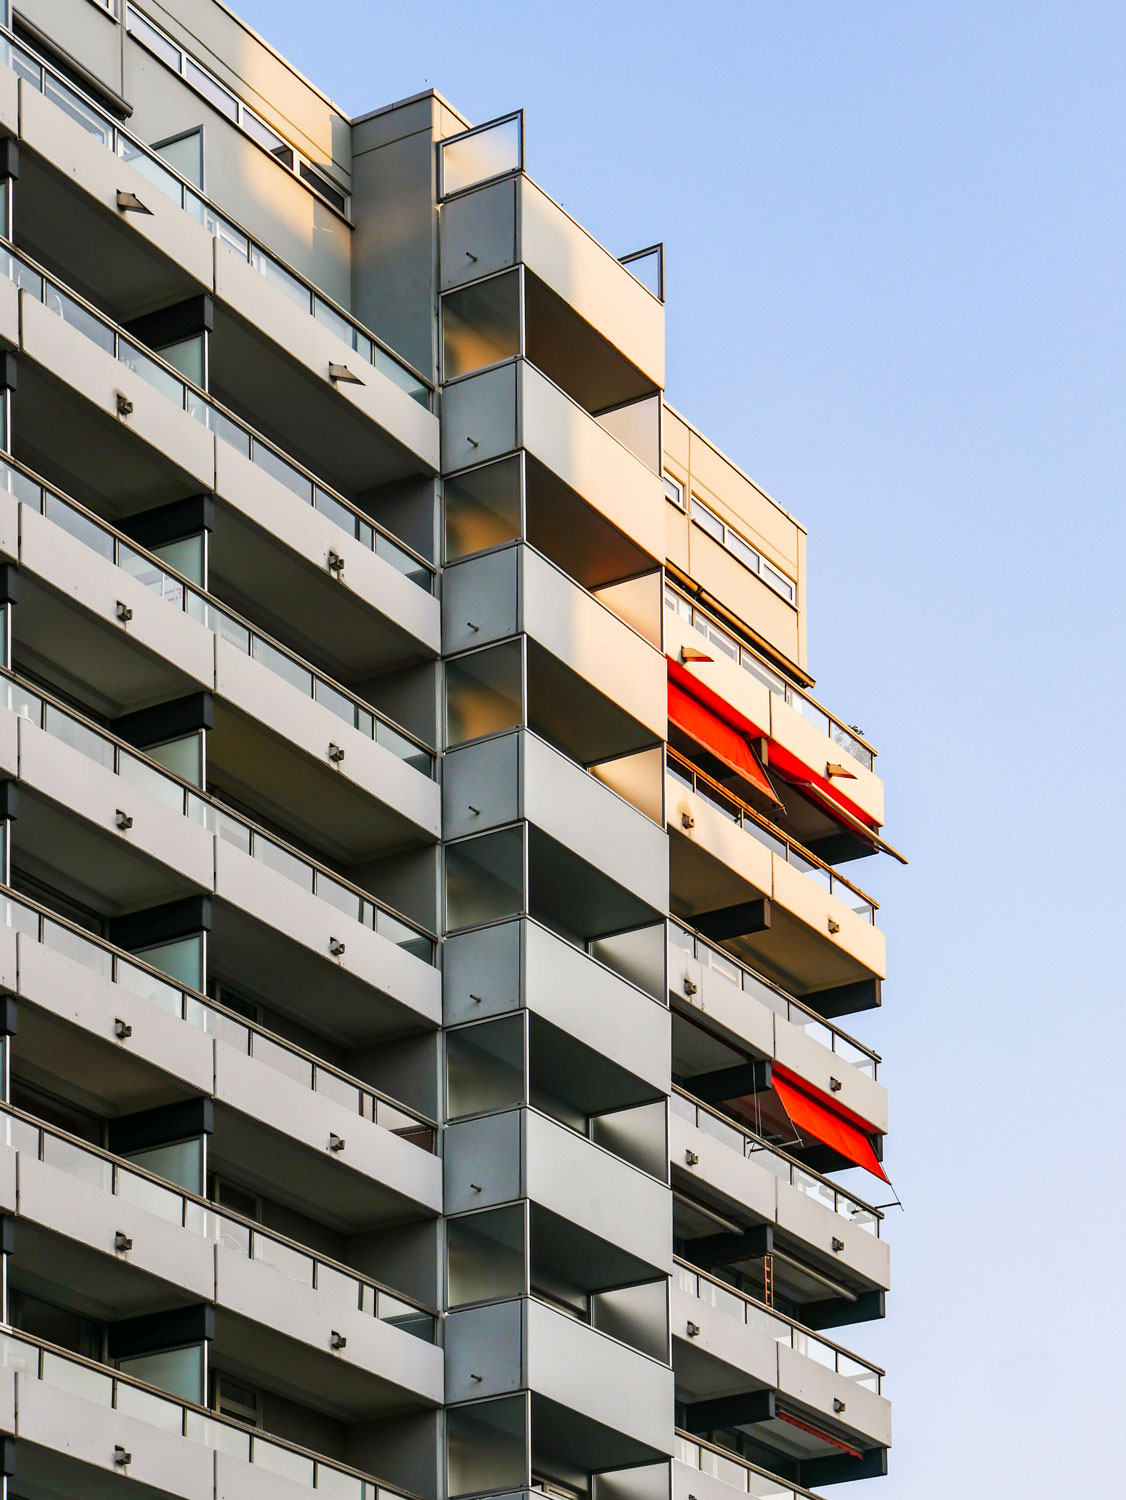 View of the facade of a high-rise building with many balconies. Some of the balconies have a red awning.